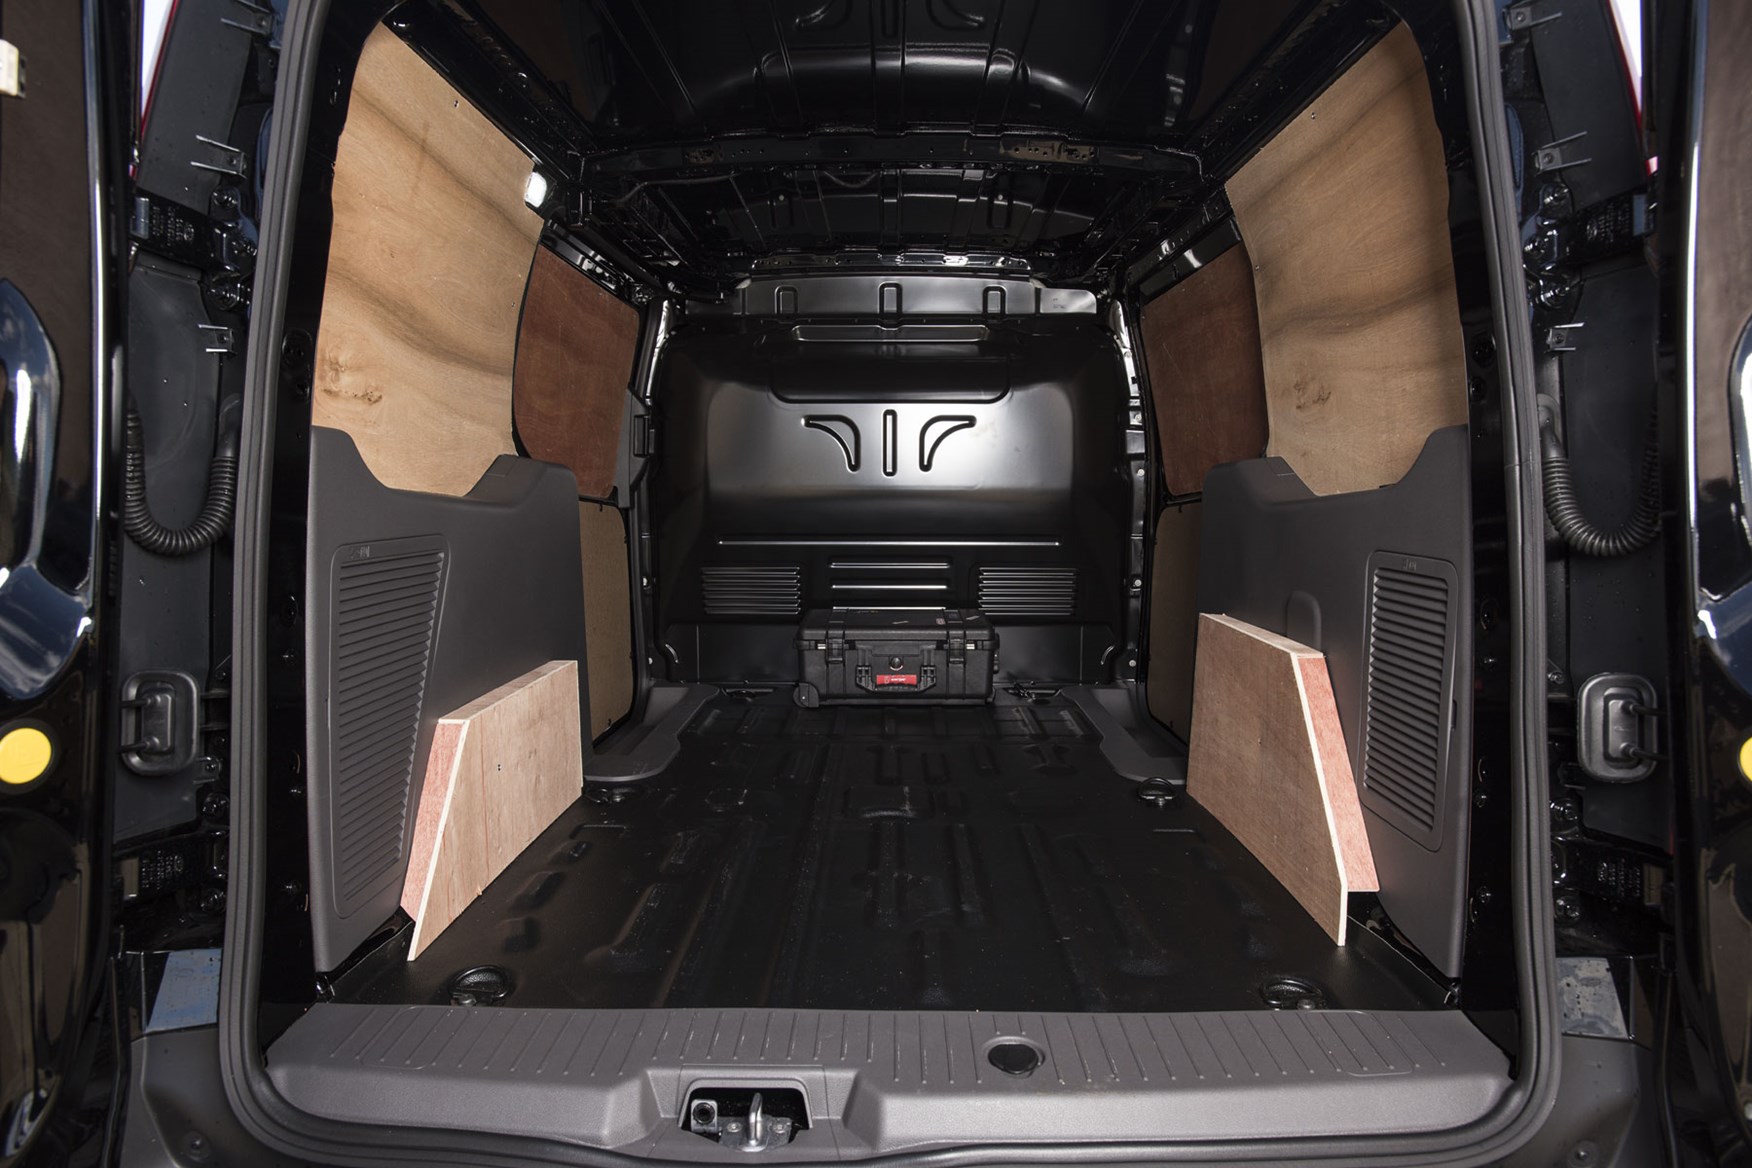 Ford Transit Connect automatic review - load area, 2019